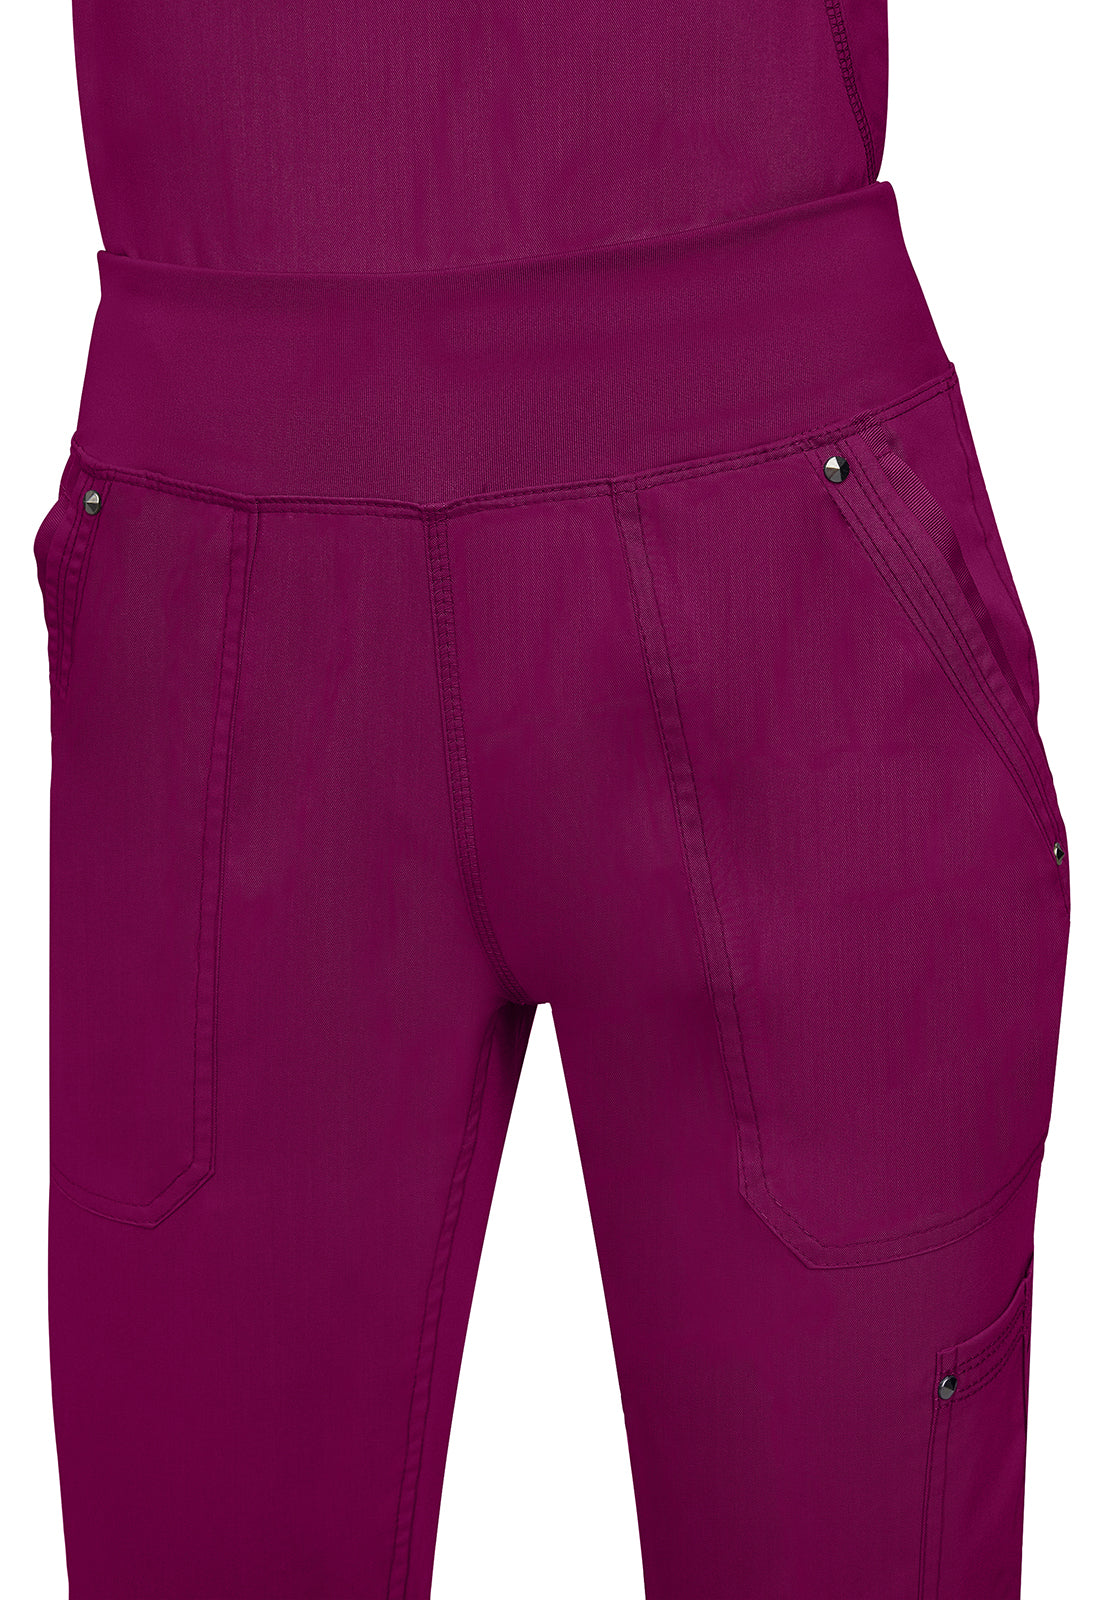 Clearance Purple Label by Healing Hands Women's Toby Jogger Scrub Pant